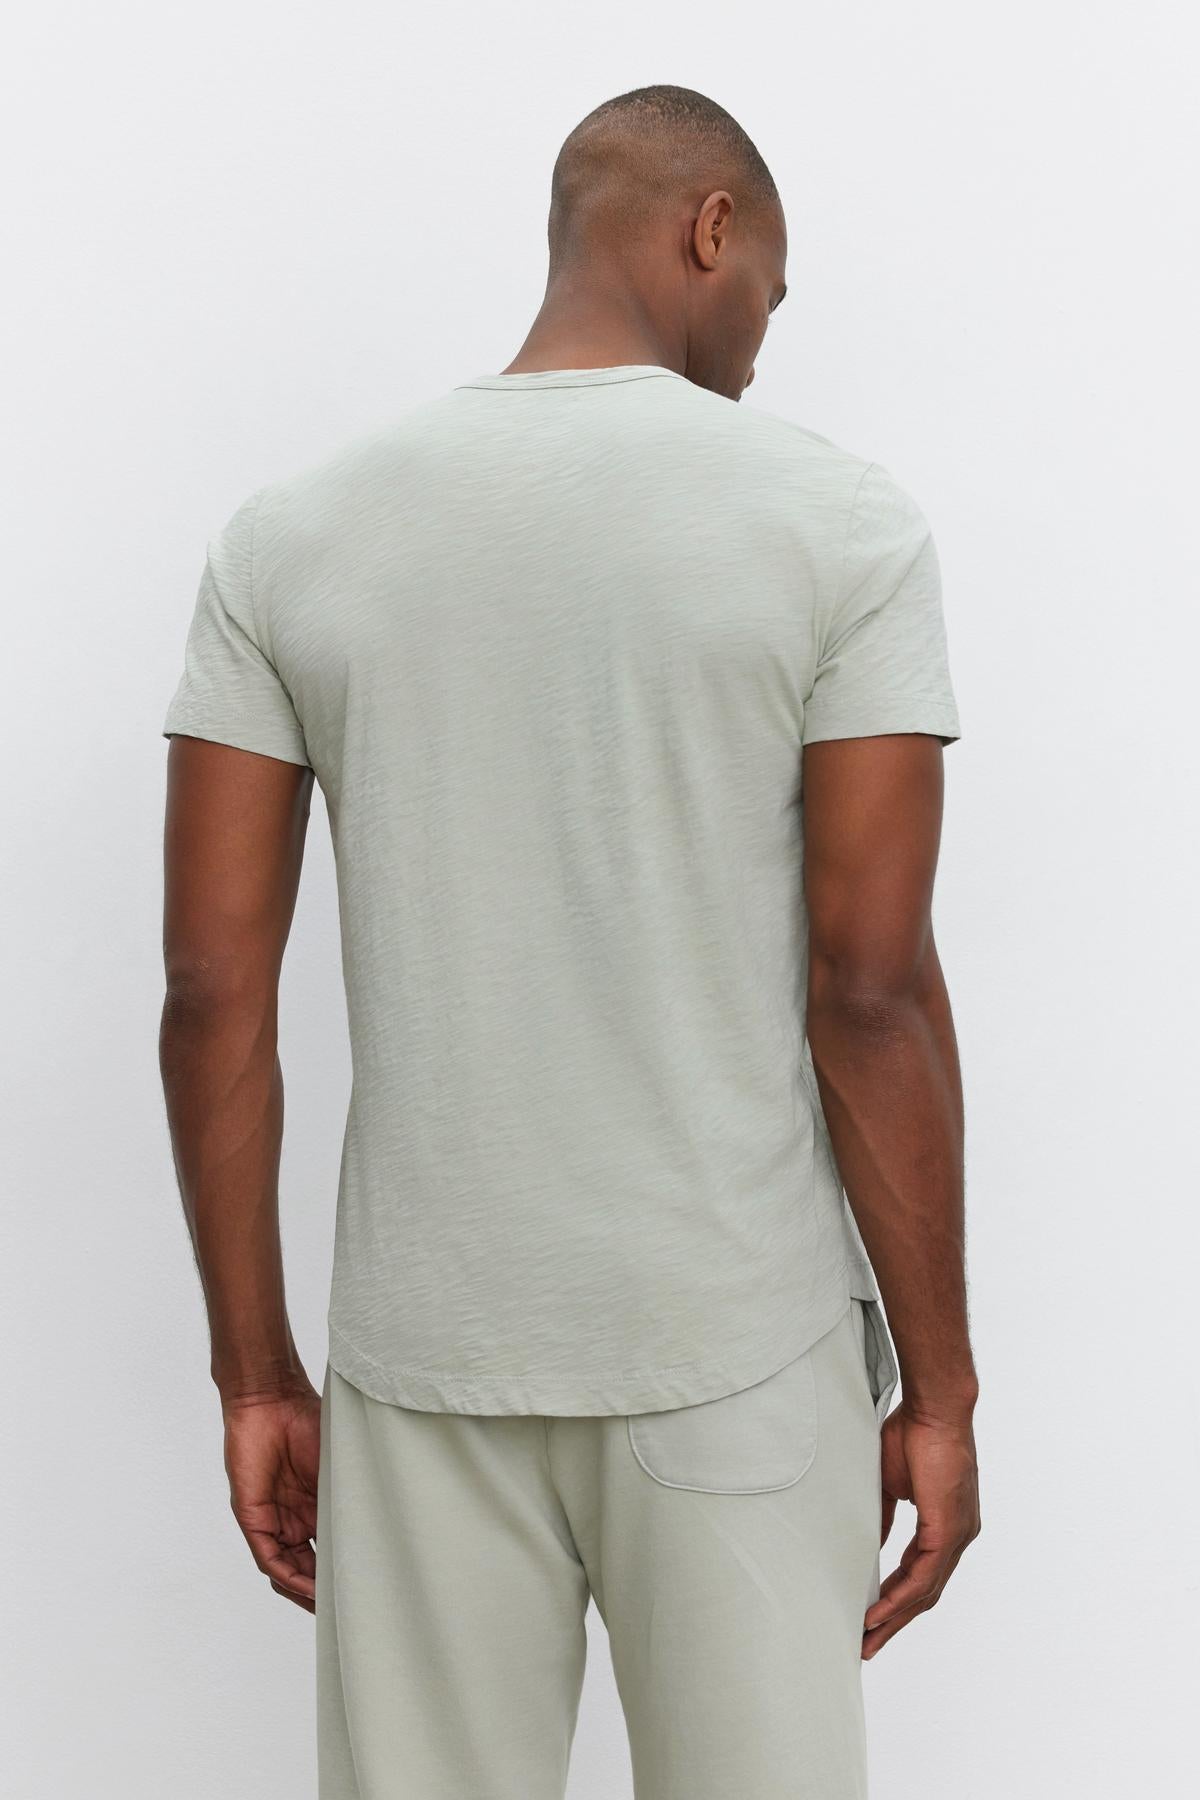 A person stands facing away, wearing a light gray short-sleeve AMARO TEE by Velvet by Graham & Spencer and matching pants, exuding a relaxed and stylish feel.-37469132161217